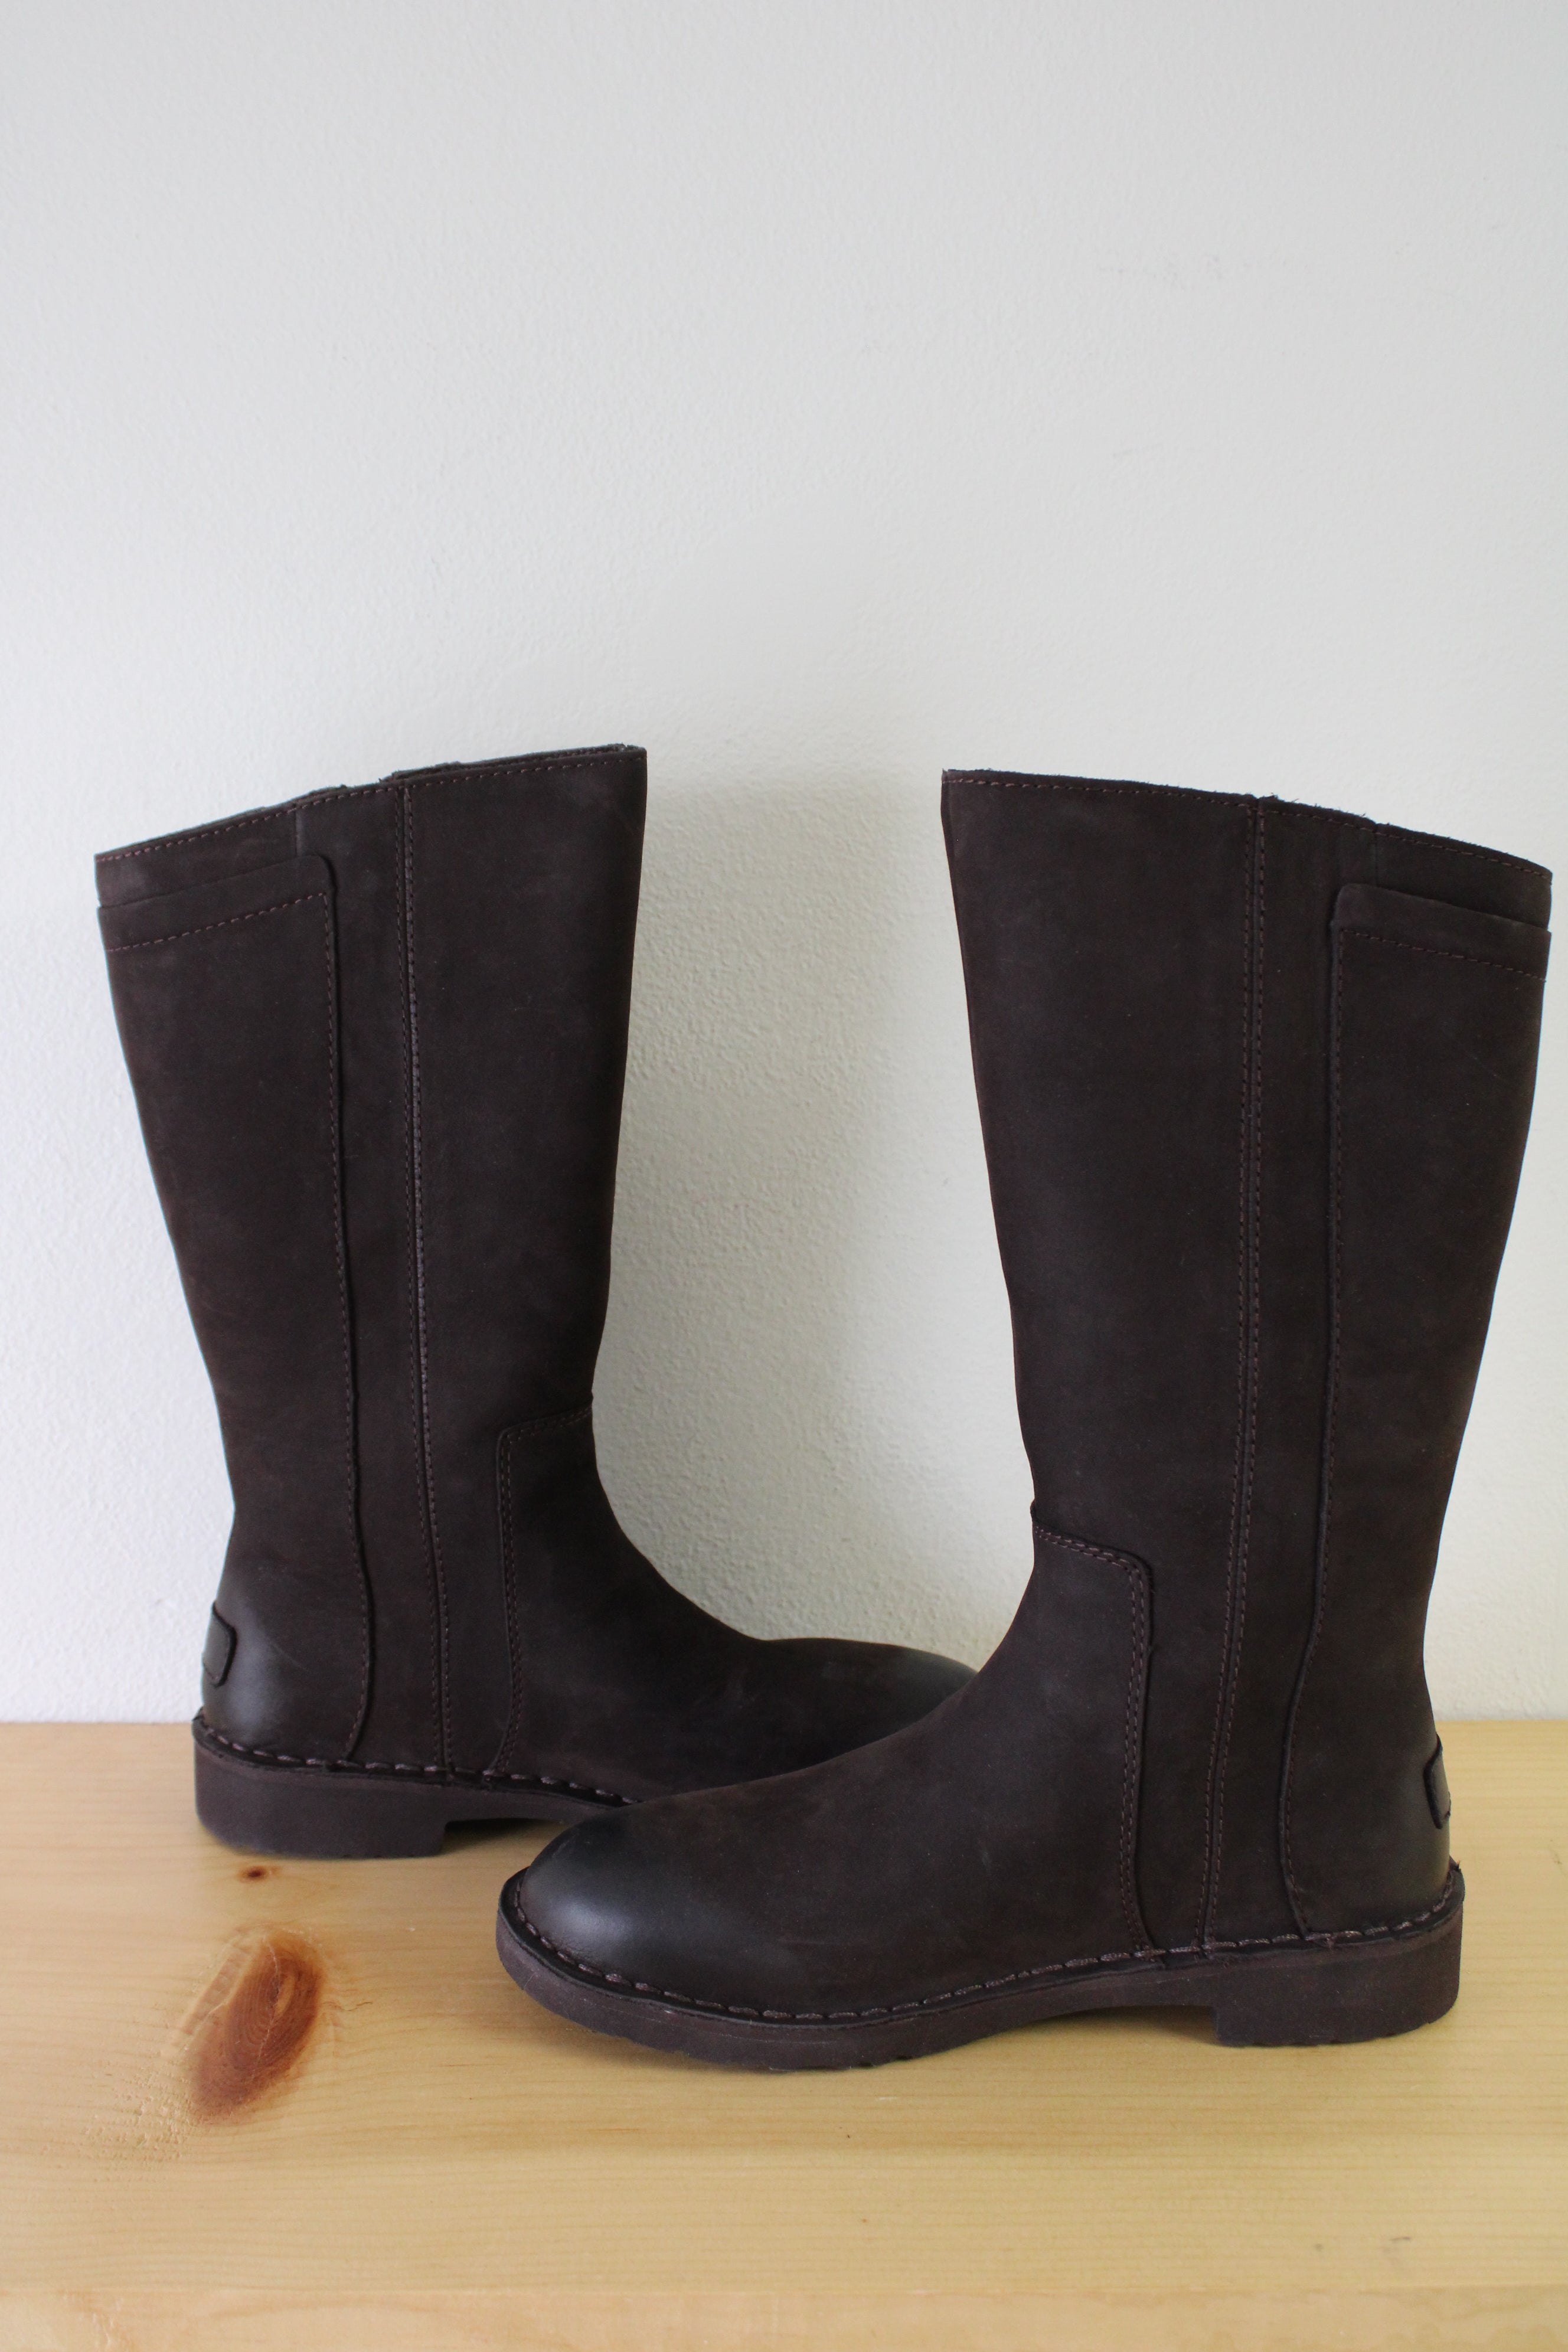 NEW Ugg Australia Elly Stout Brown Tall Nubuck Boots | Size 5.5